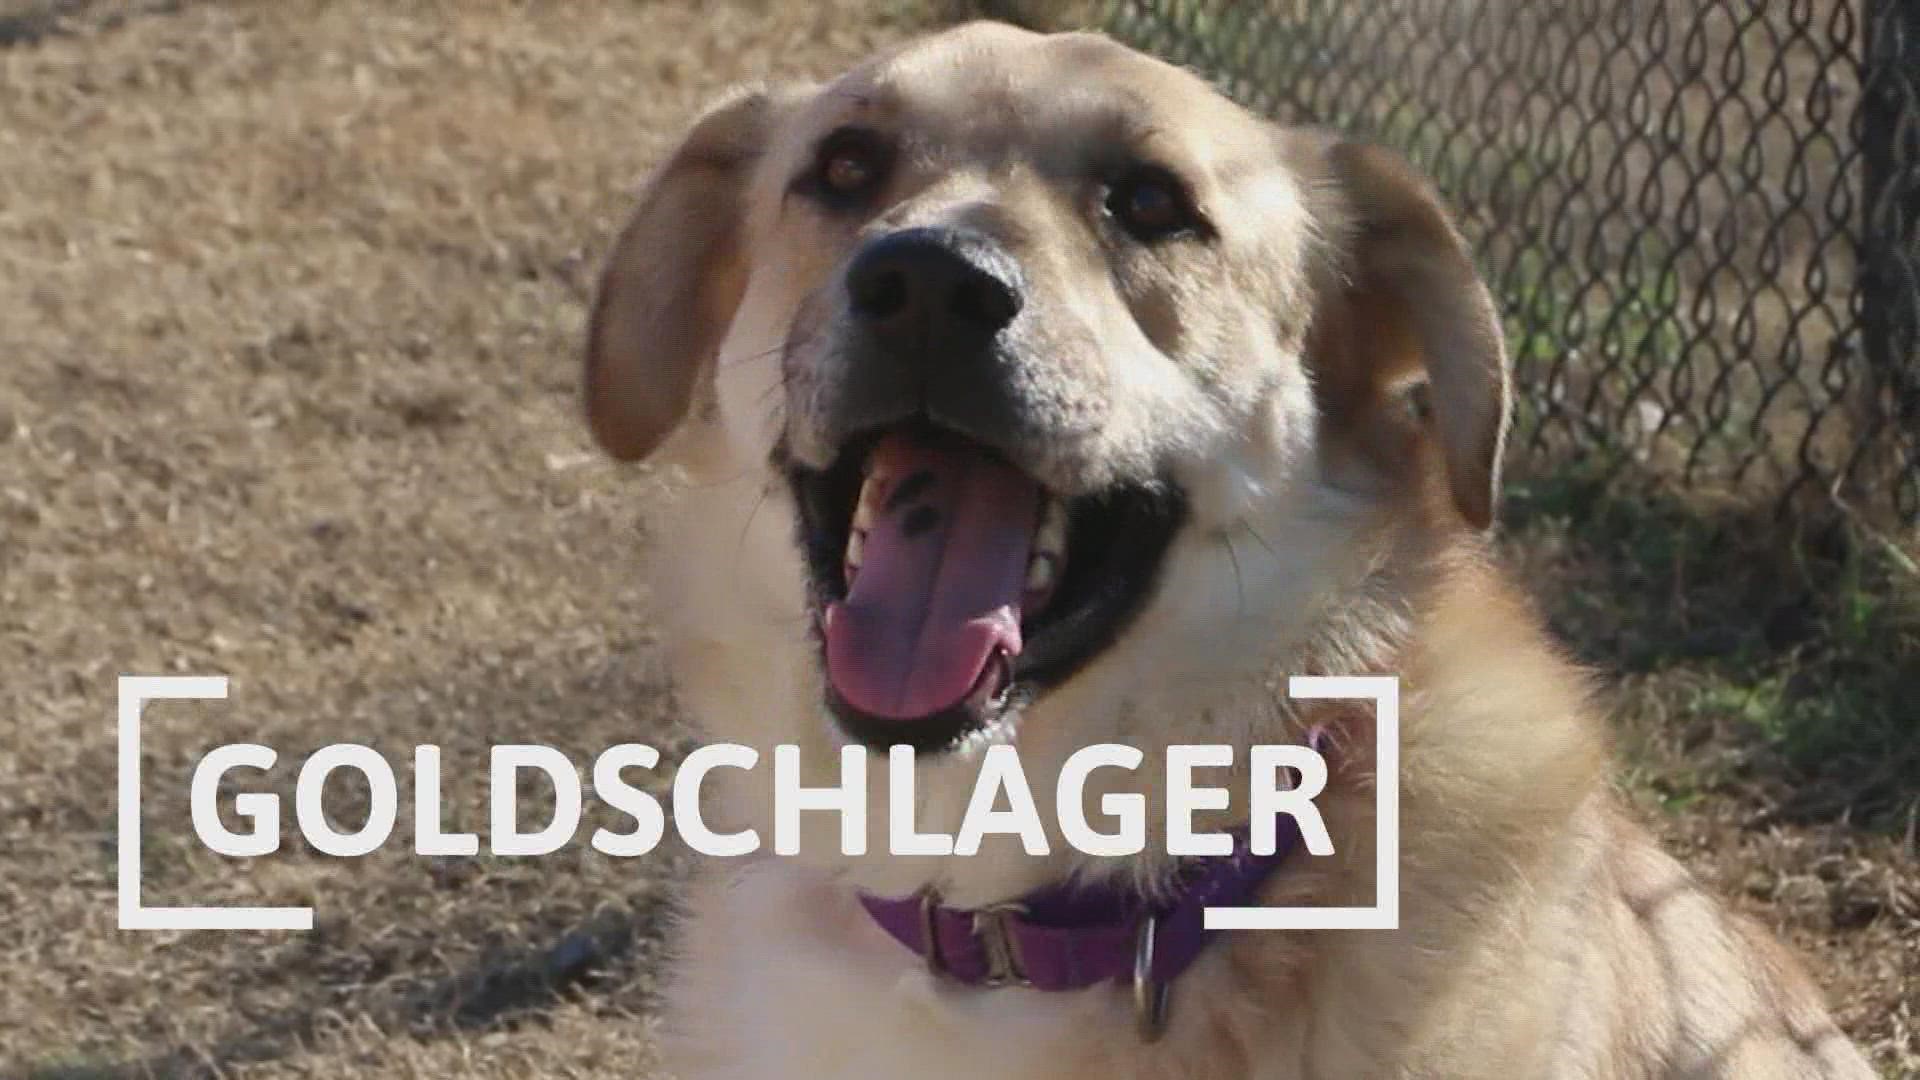 He's a 2-year-old Shepard mix and weighs about 62 lbs. His adoption fee is only $25!